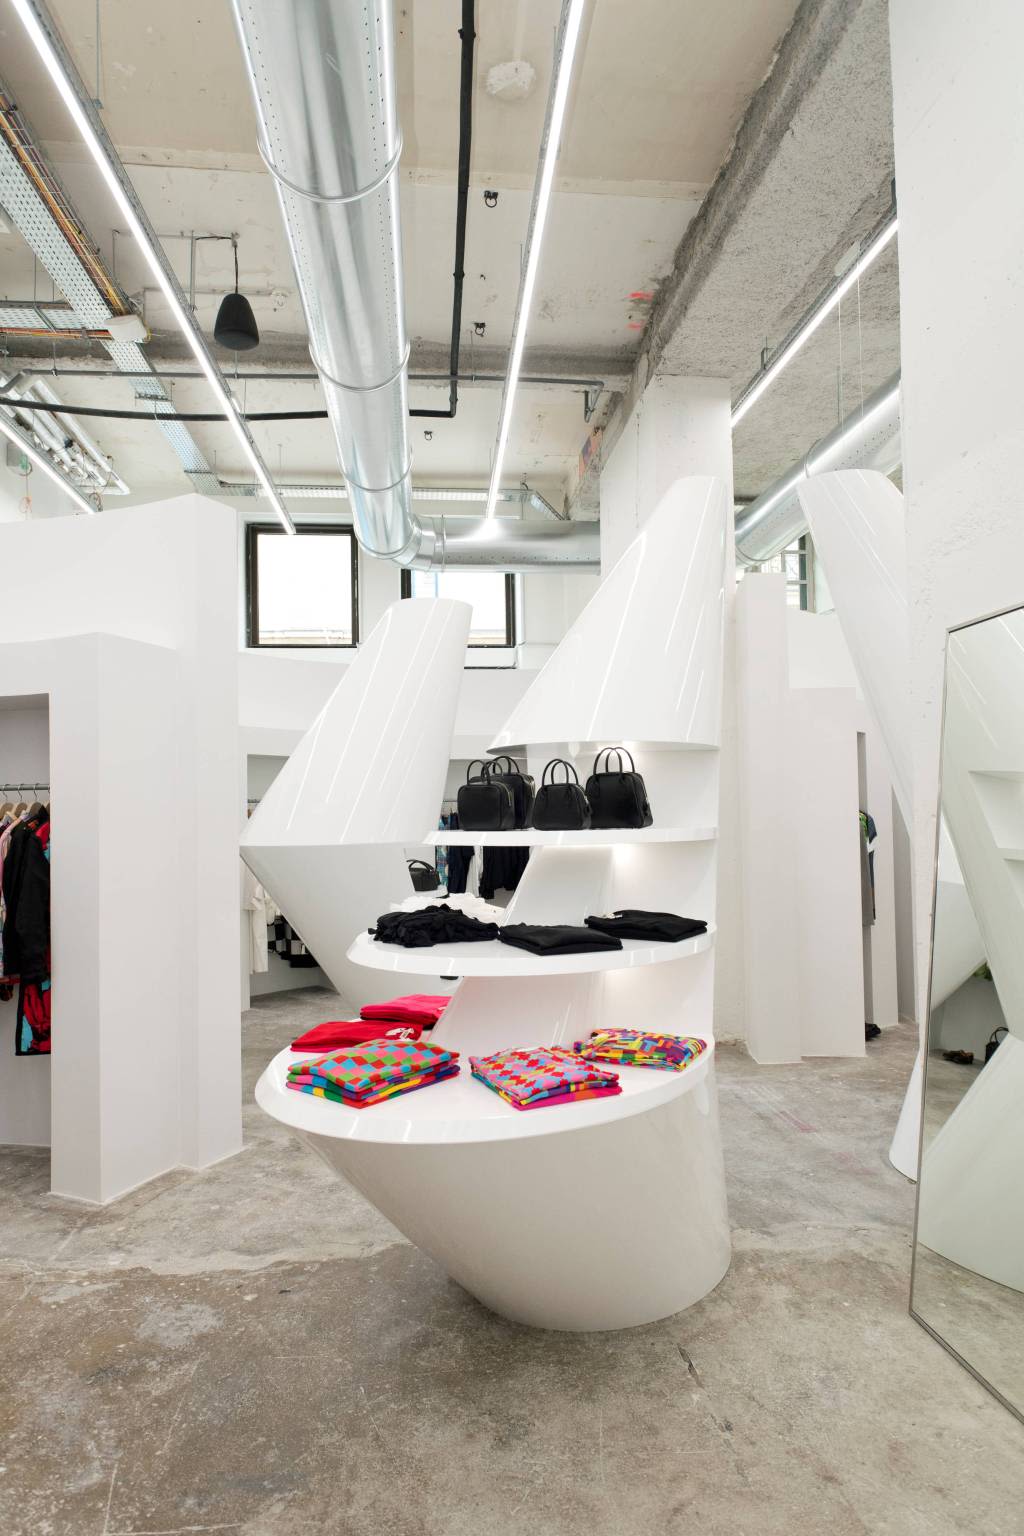 EXCLUSIVE: A Preview of Paris’ New Spaceship-like Dover Street Market